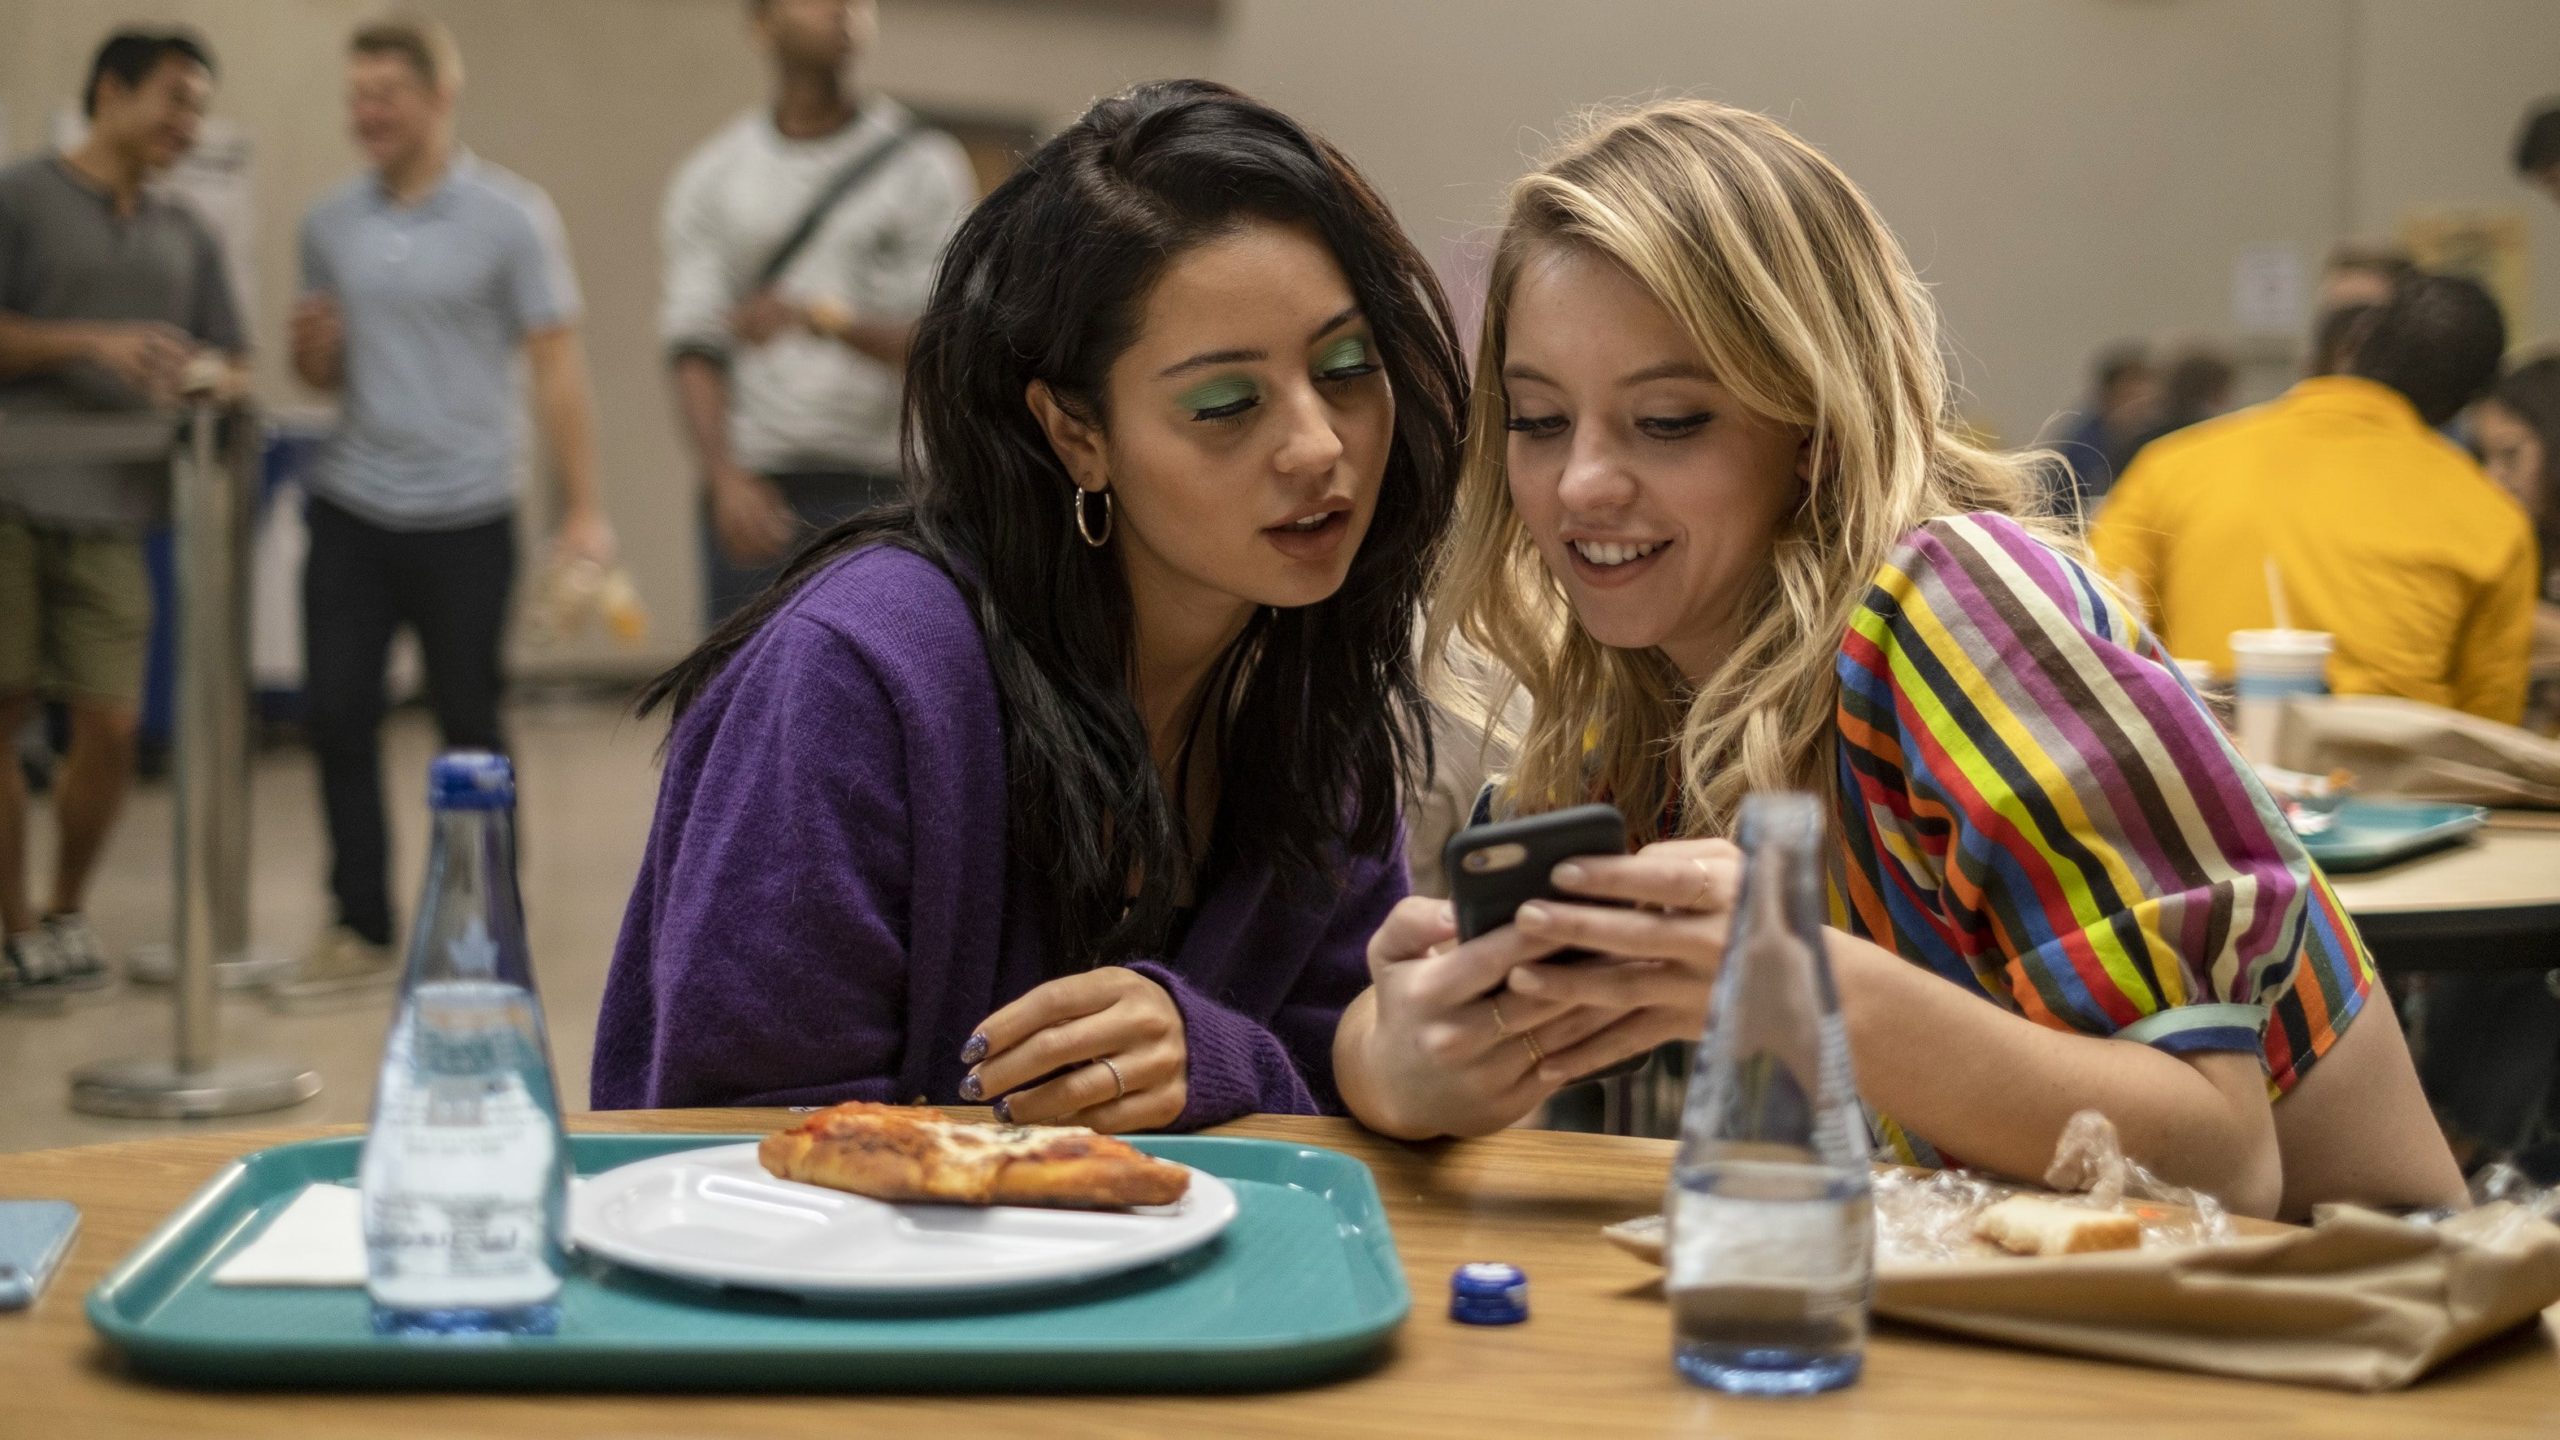 Maddy and Cassie look together at Cassie's phone in the school cafeteria in HBO's 'Euphoria' (2019-).